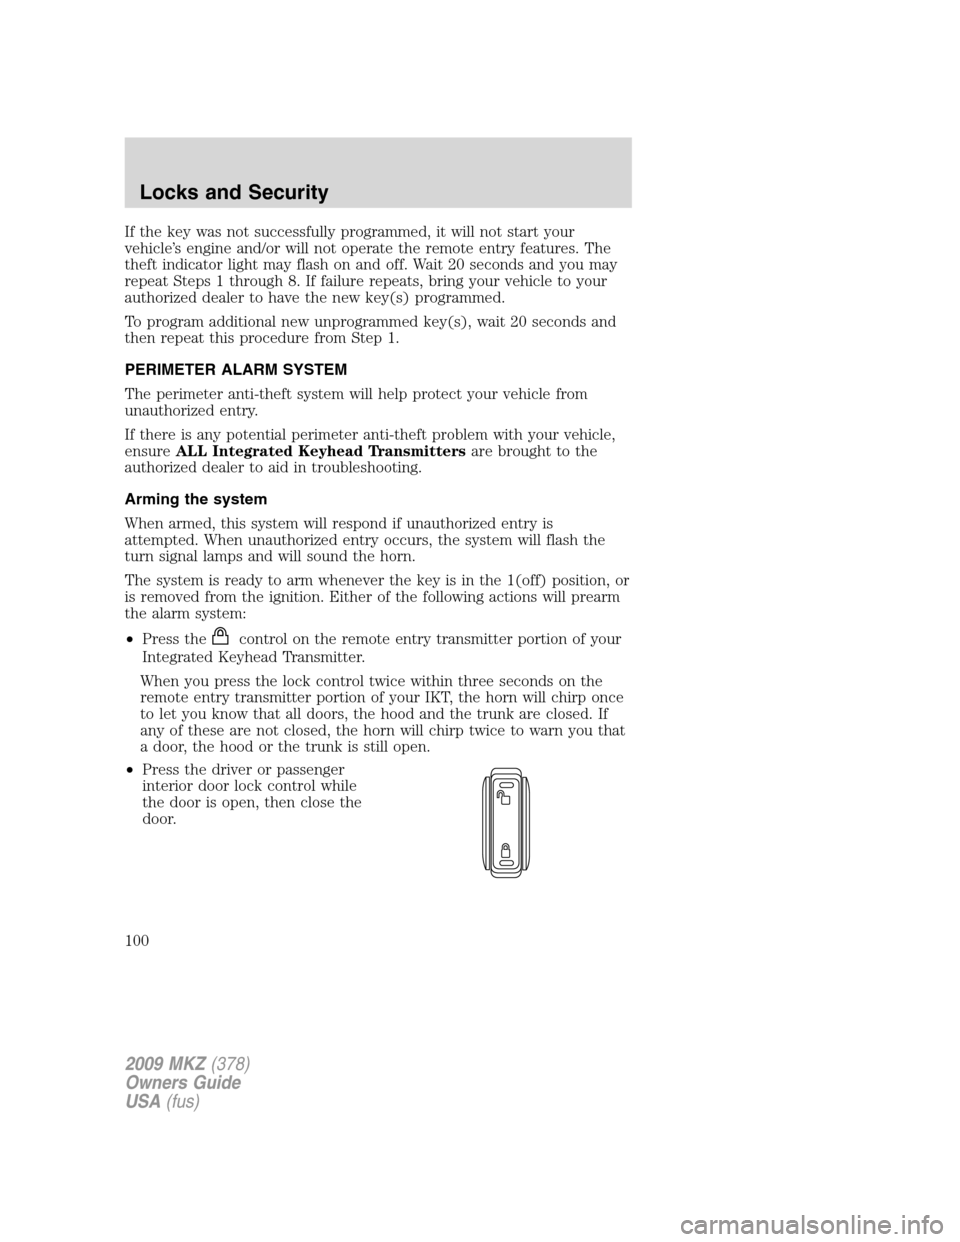 LINCOLN MKZ 2009 Service Manual If the key was not successfully programmed, it will not start your
vehicle’s engine and/or will not operate the remote entry features. The
theft indicator light may flash on and off. Wait 20 seconds